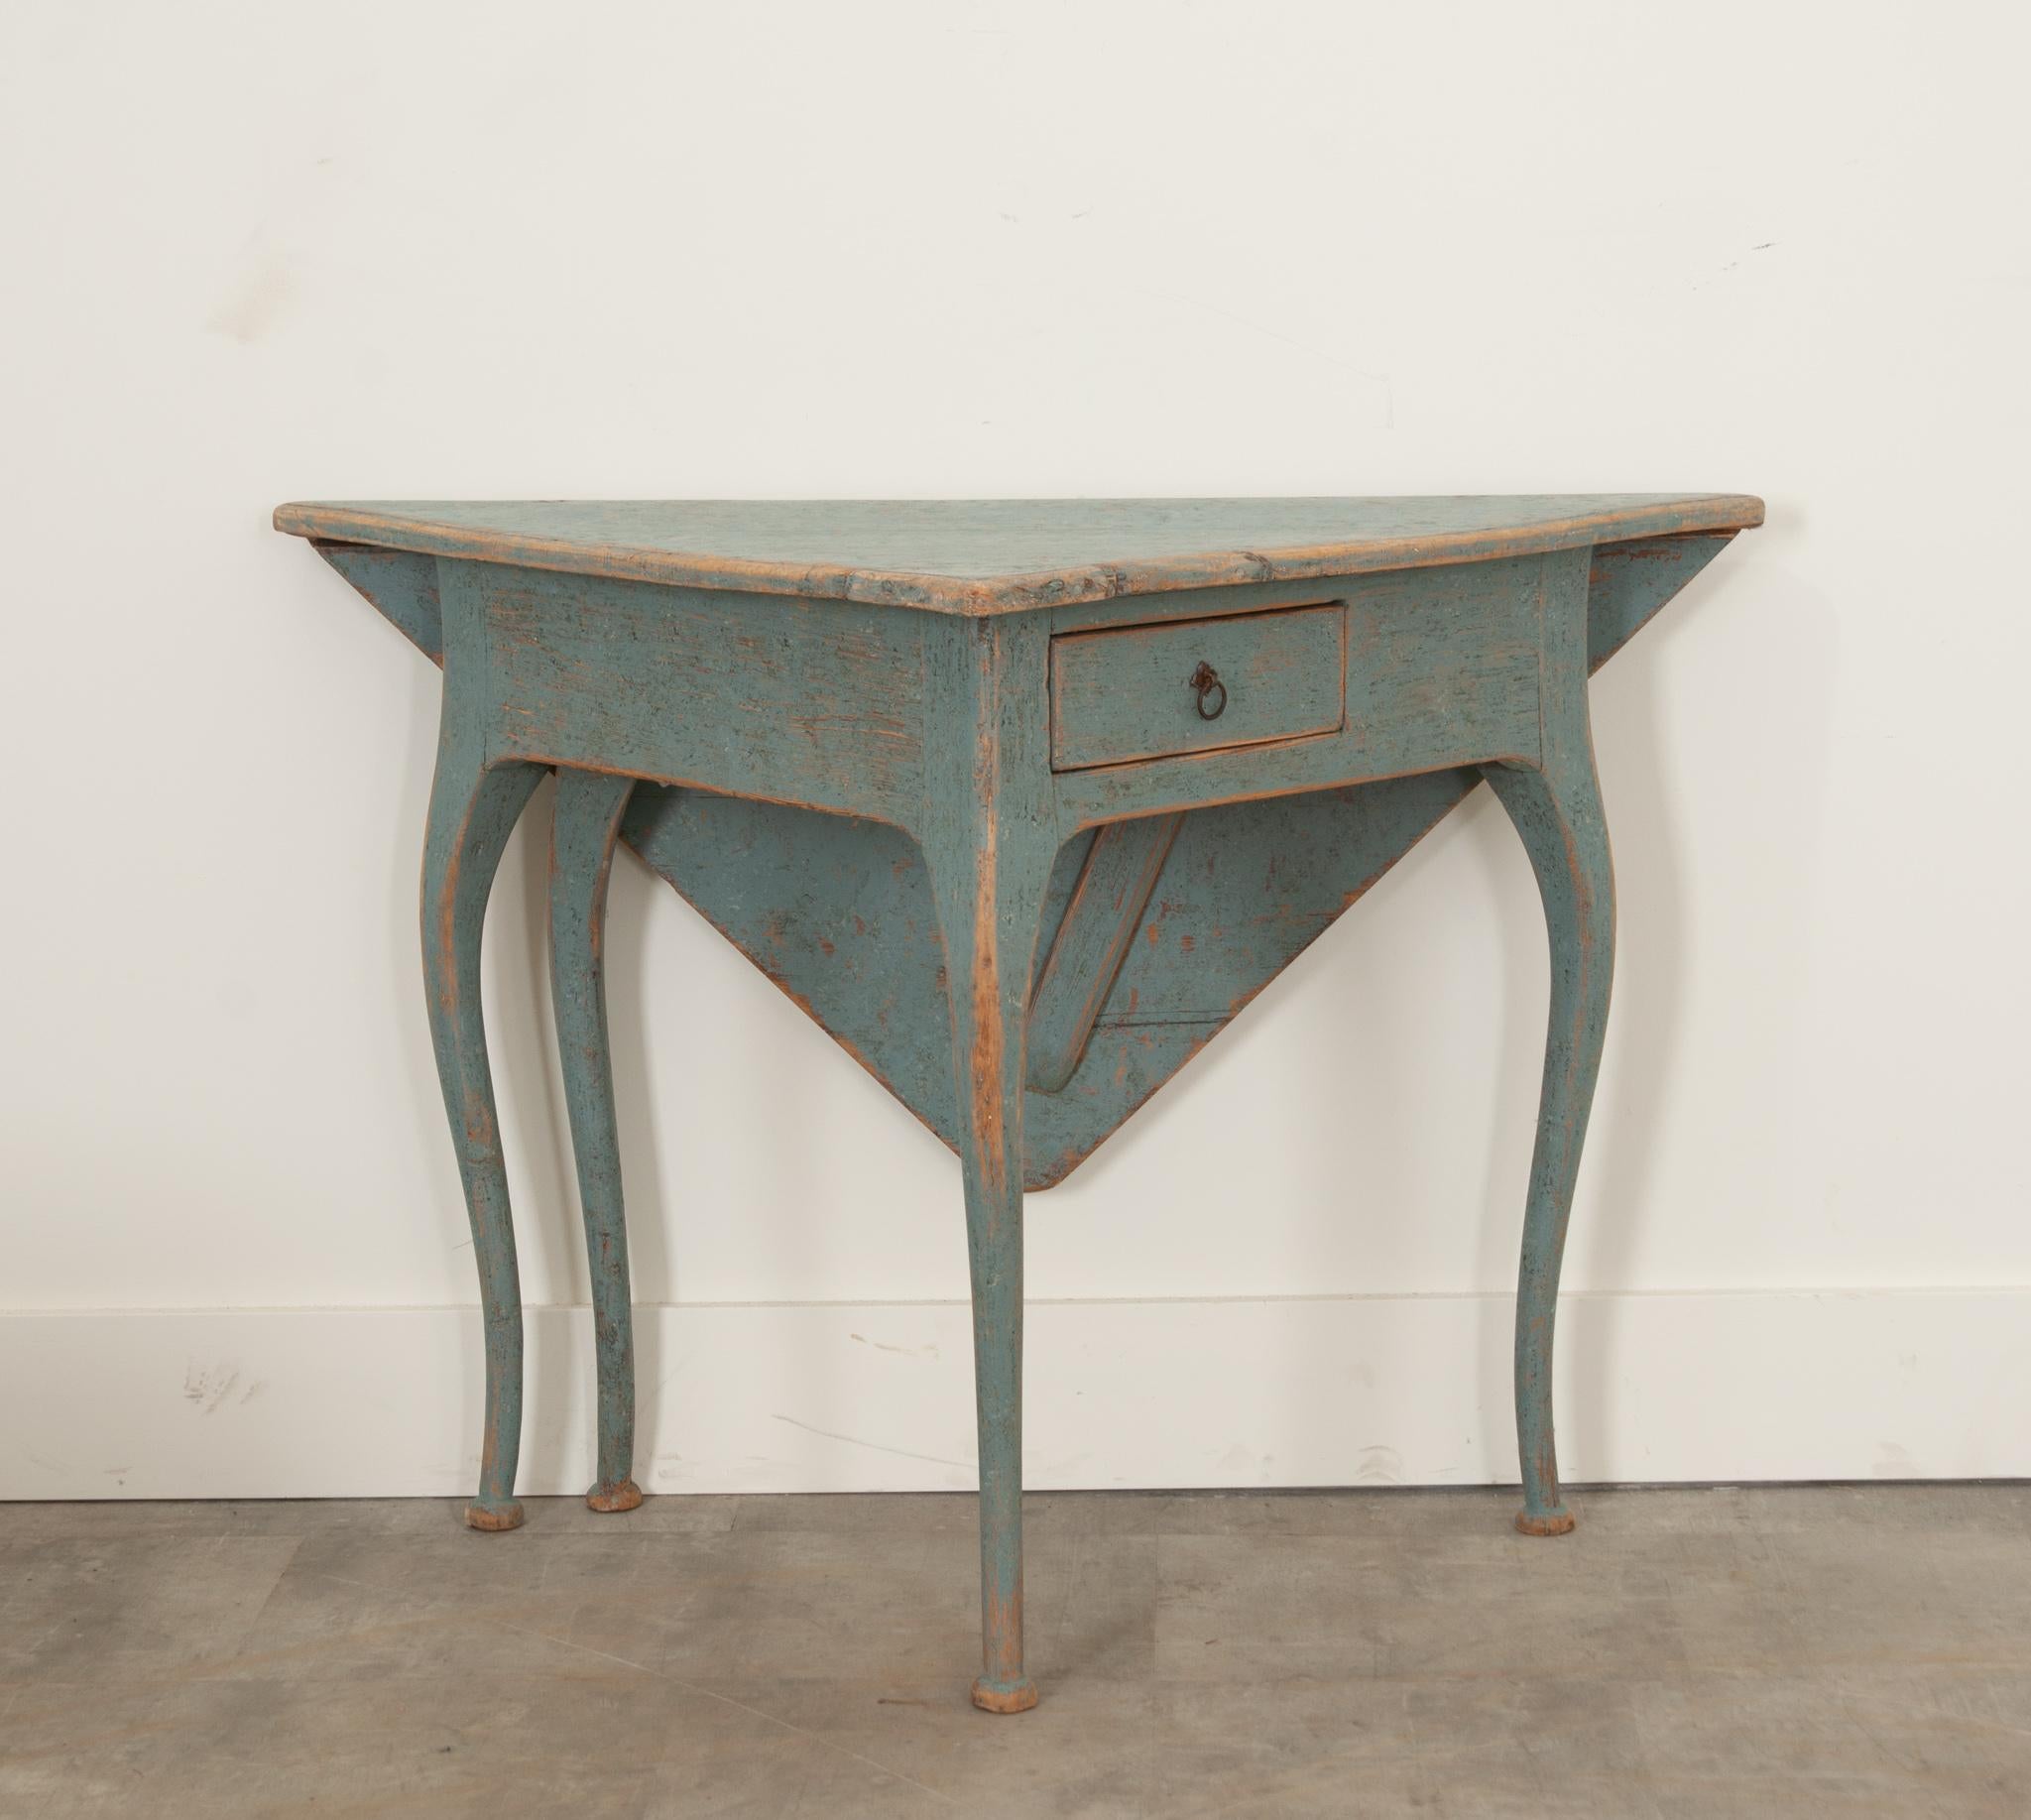 A darling 19th century Swedish corner or handkerchief table of petite proportions with a wonderfully worn sky blue painted finish. The triangular top is fixed with a rear-drop leaf that swings up to form a square surface, being supported by a